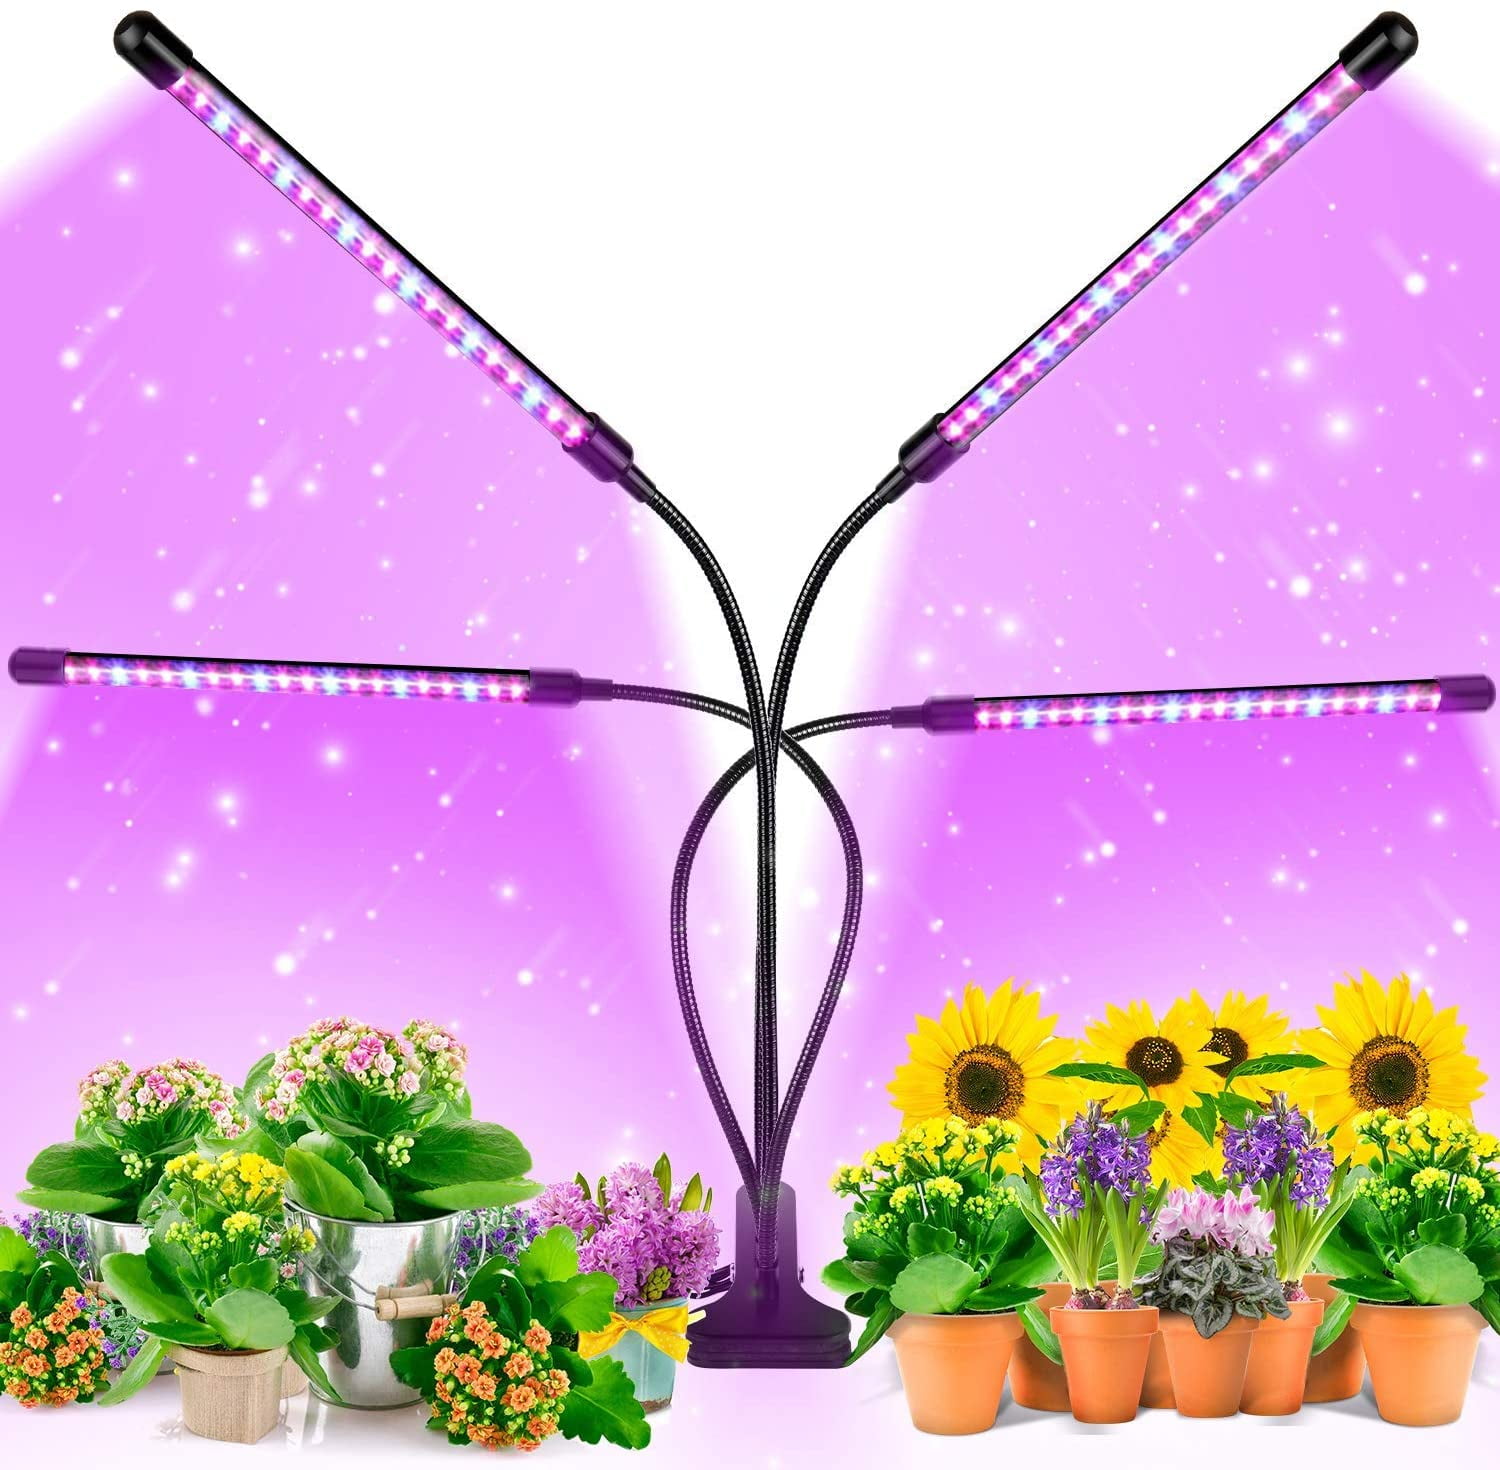 100W 80W E27 LED Grow Light Red Blue UV IR LED Growing Lamp For Hydroponic Plant